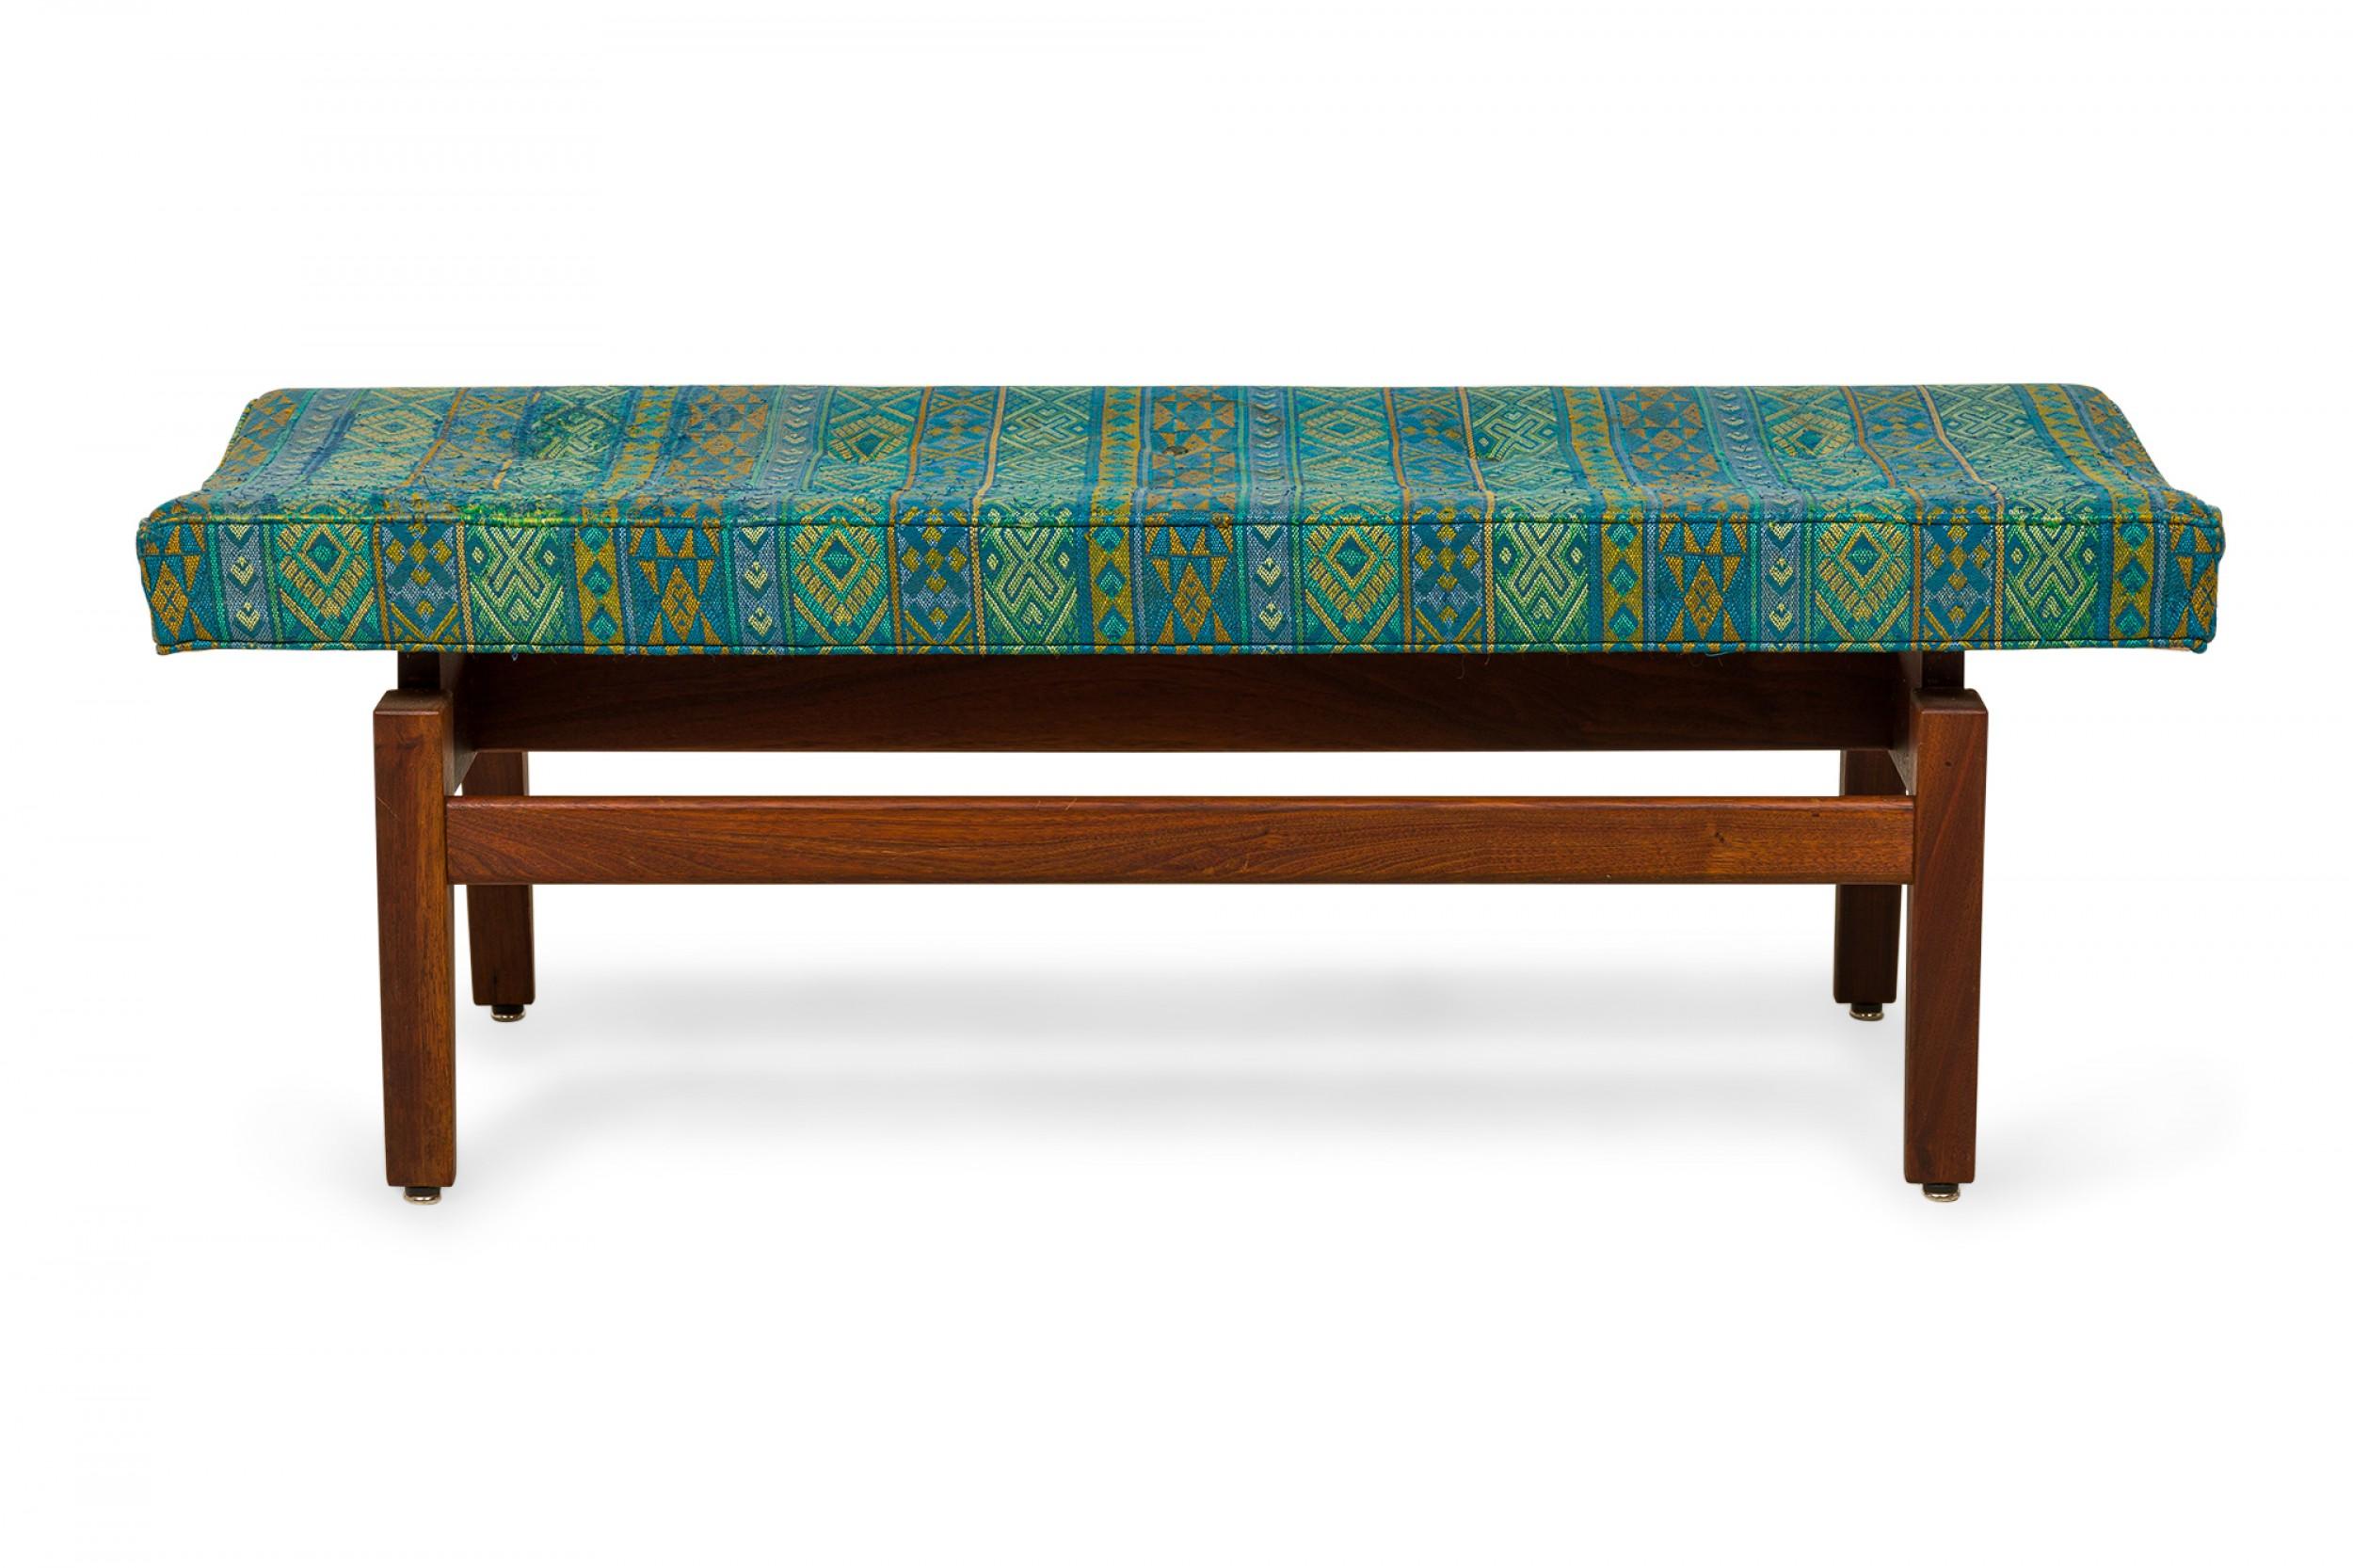 Danish mid-century rectangular floating bench with a banded Southwestern blue and green patterned fabric upholstered seat resting on a wooden floating frame base. (JENS RISOM).
   